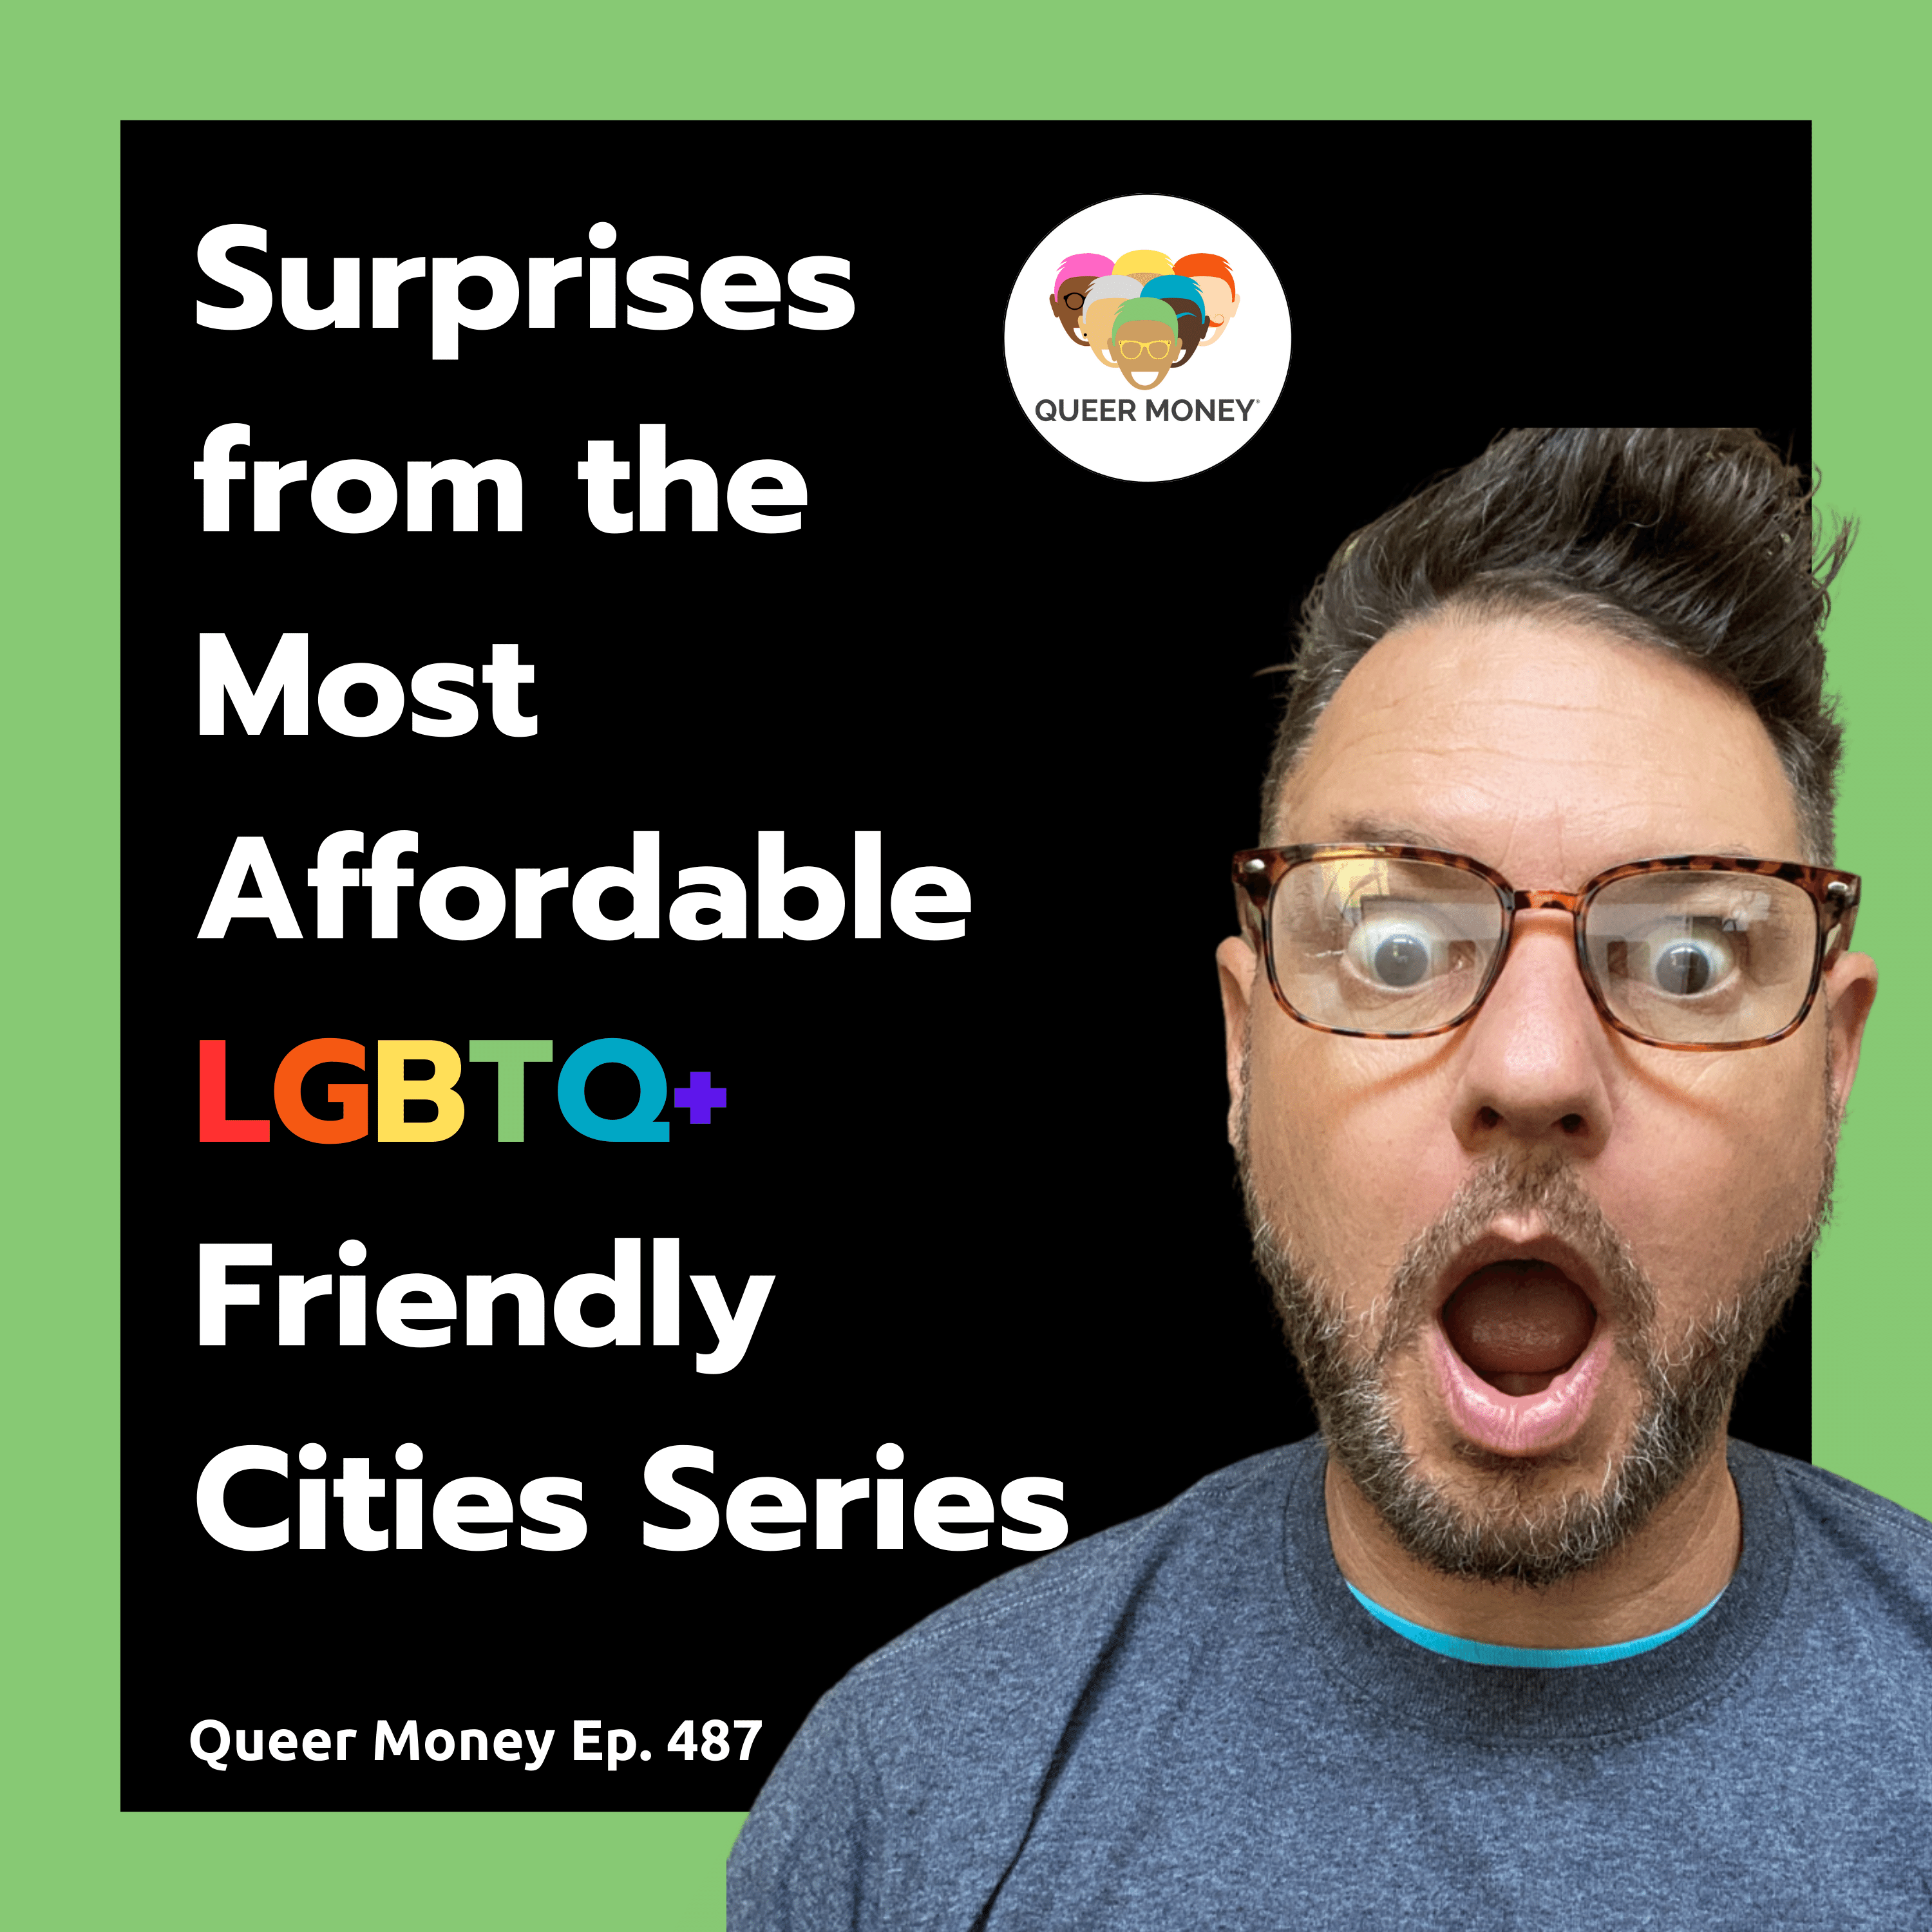 Surprises from the Most Affordable, LGBTQ Friendly Cities | Queer Money Ep. 487